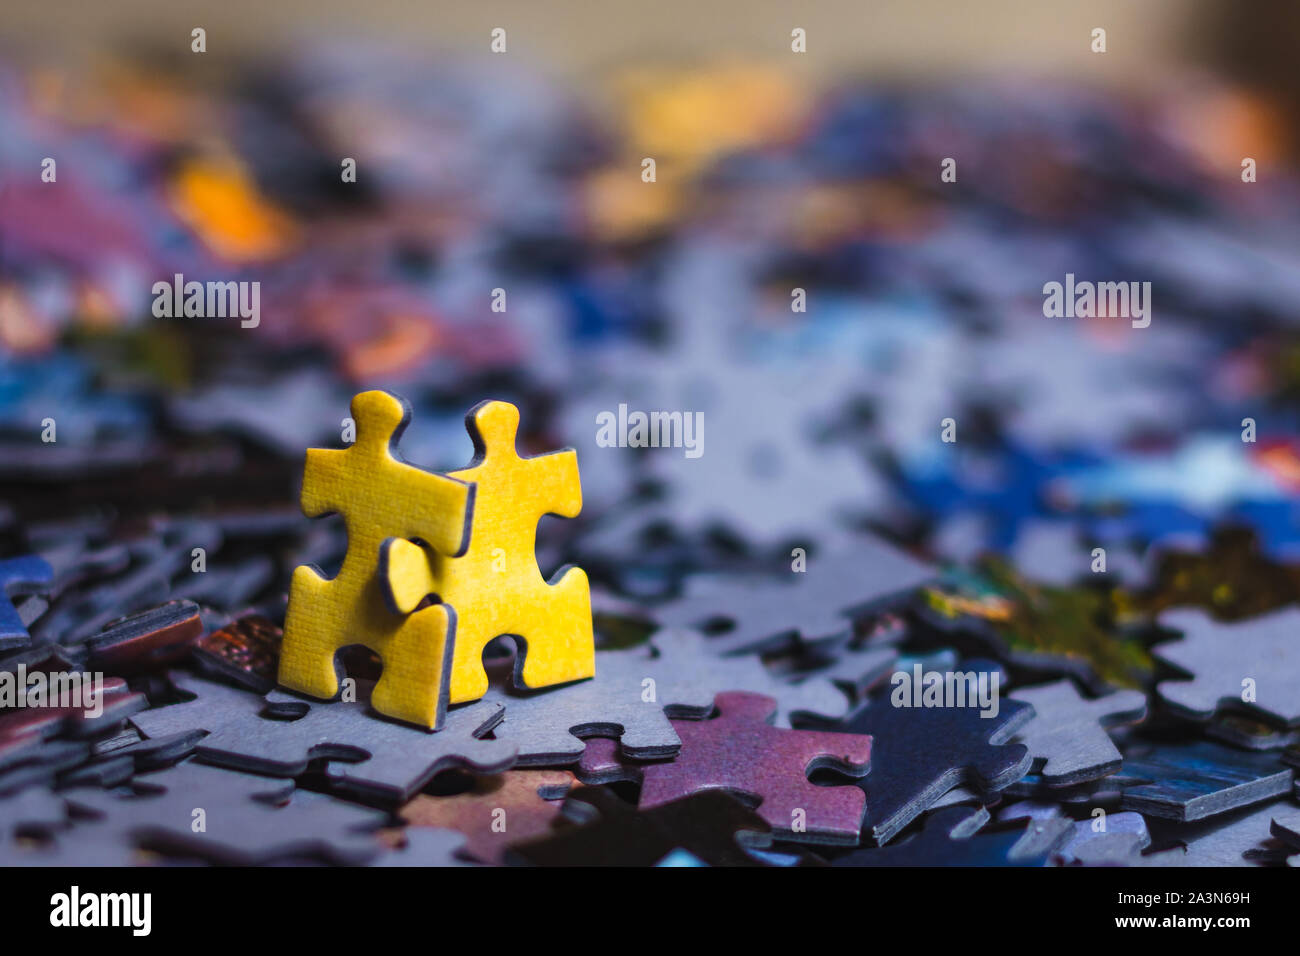 Teamwork concept, two yellow puzzles are walking together after scattered puzzles with blurry background. Stock Photo